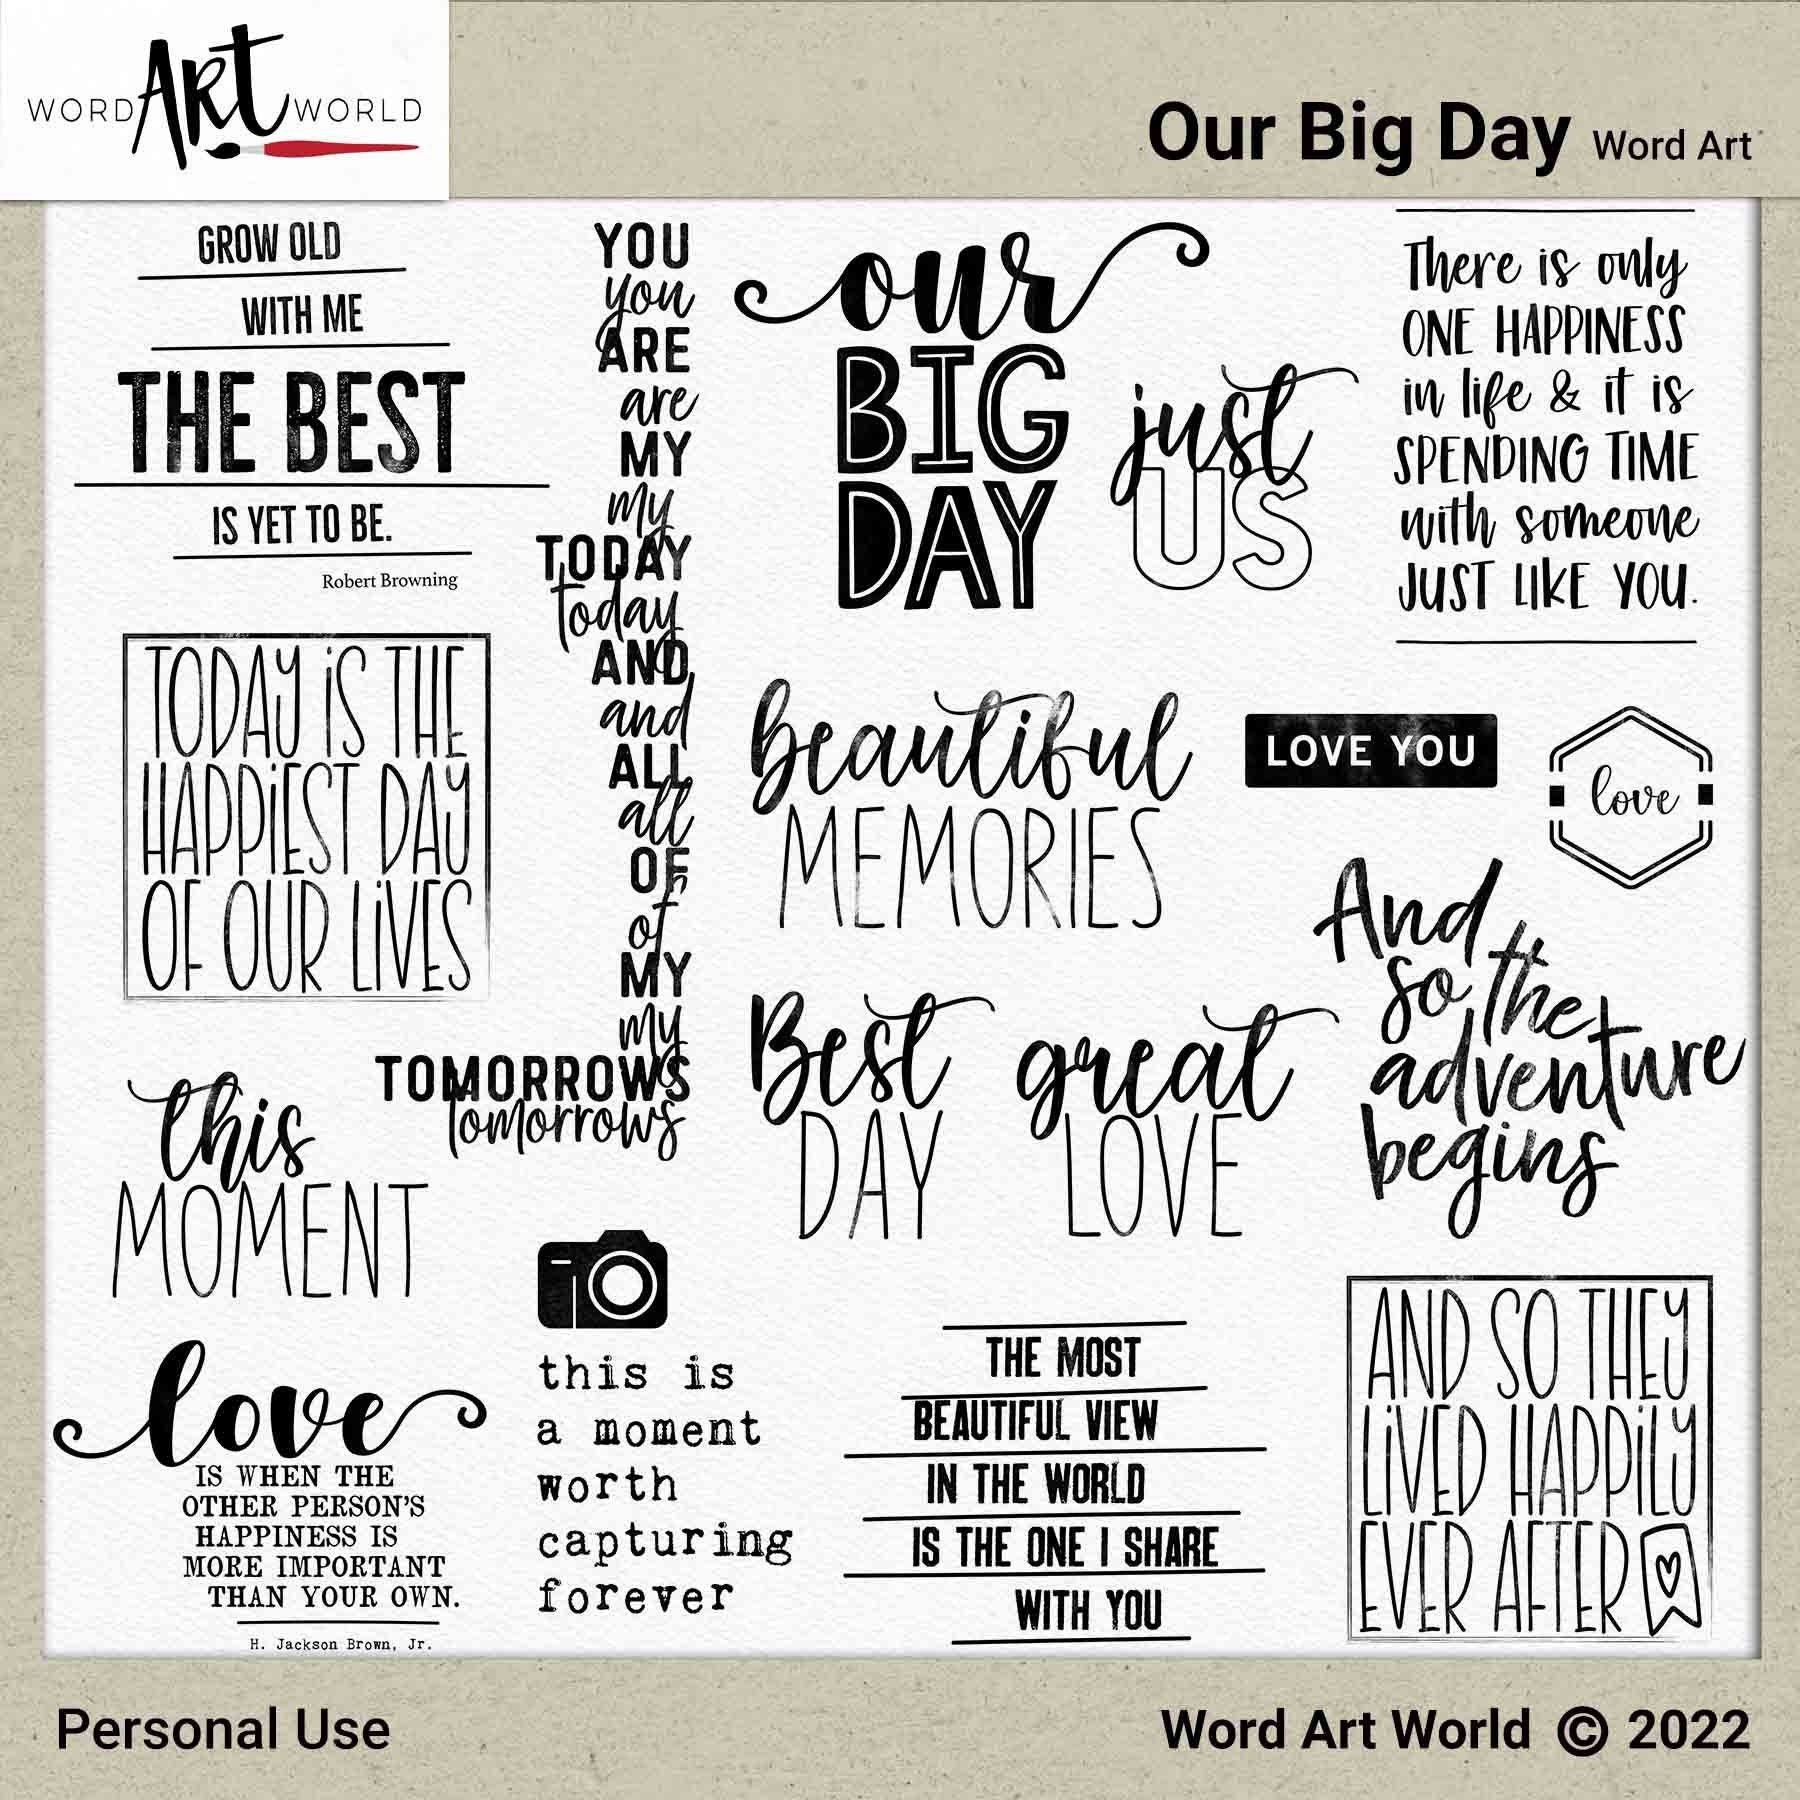 Digital and Printable Overlay Word Art Set Instant Download - Etsy